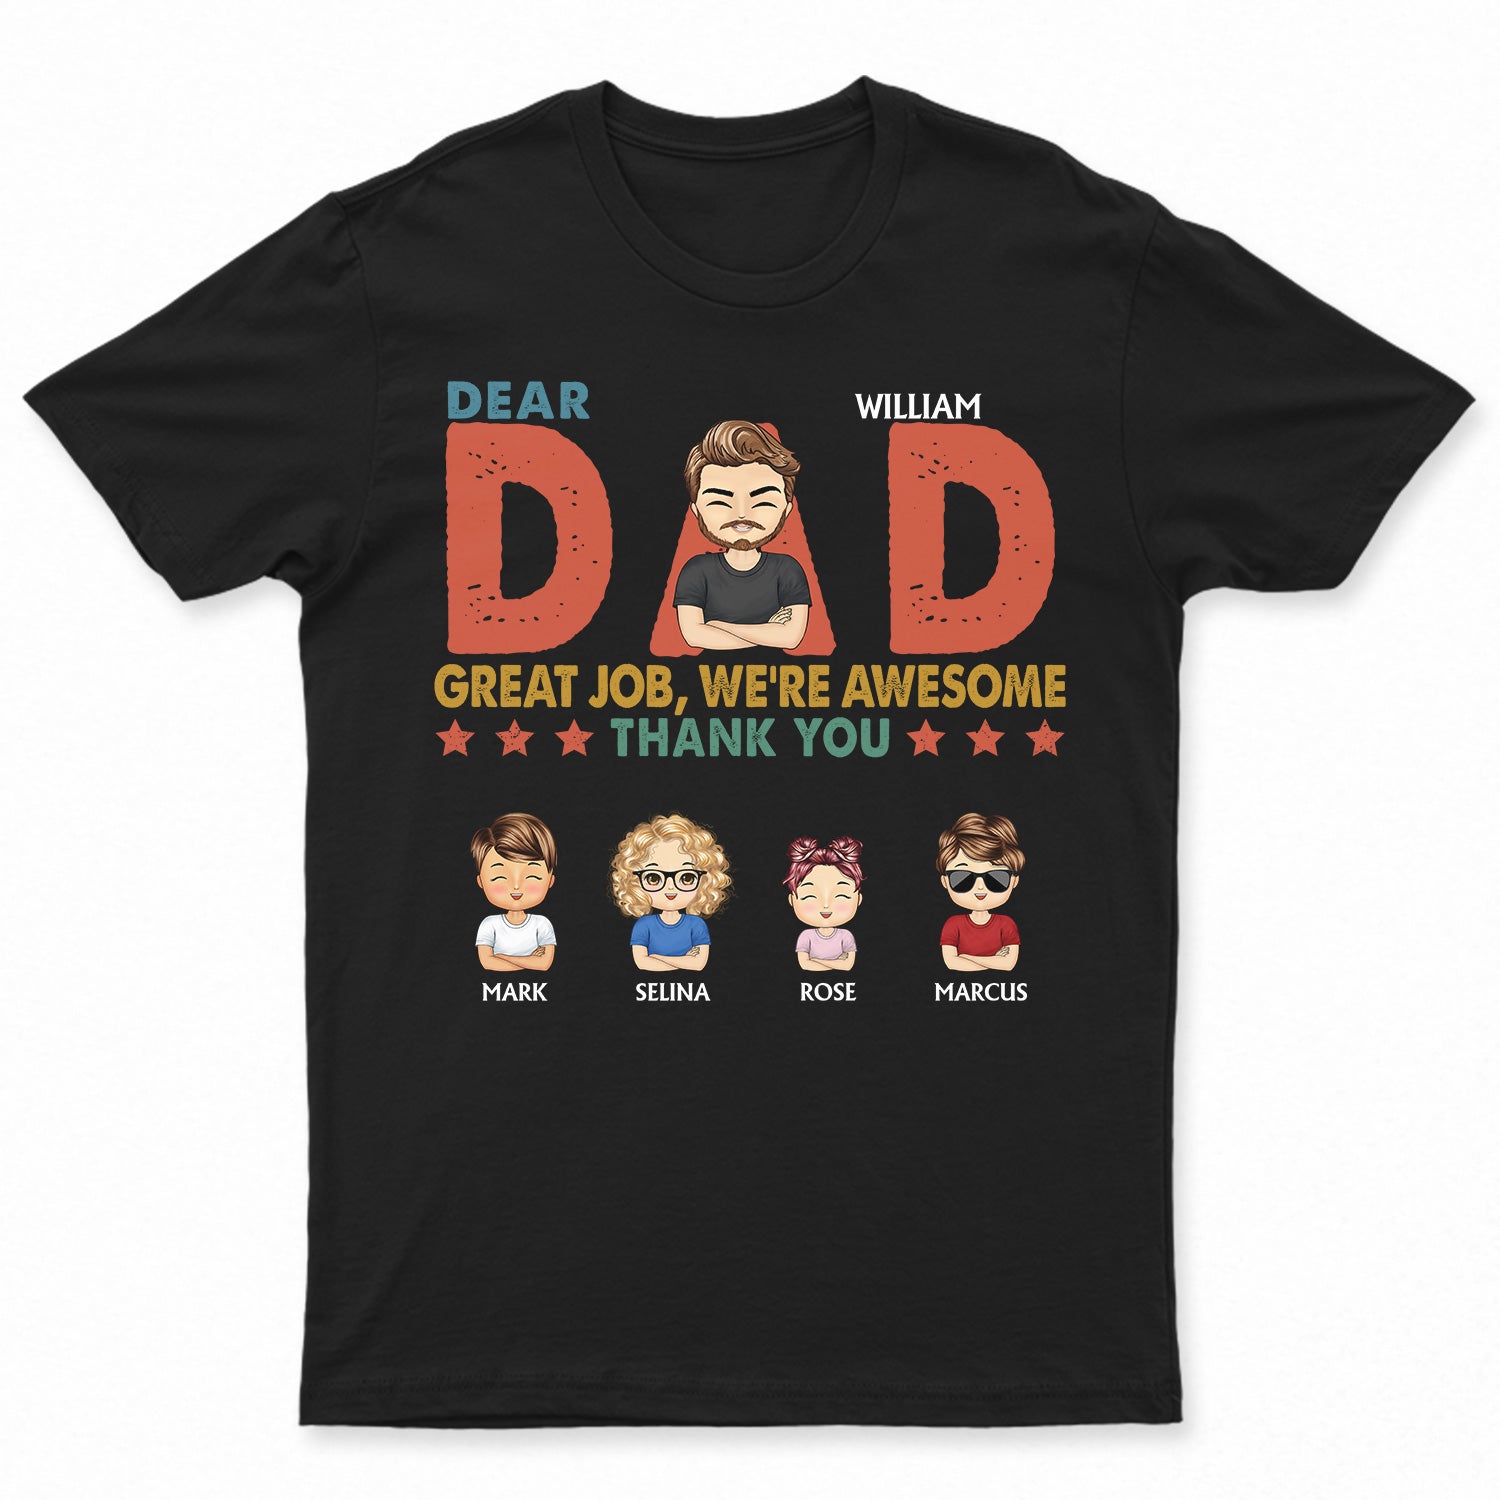 Dear Dad Great Job We're Awesome - Birthday Gift For Father, Grandpa, Family - Personalized Custom T Shirt